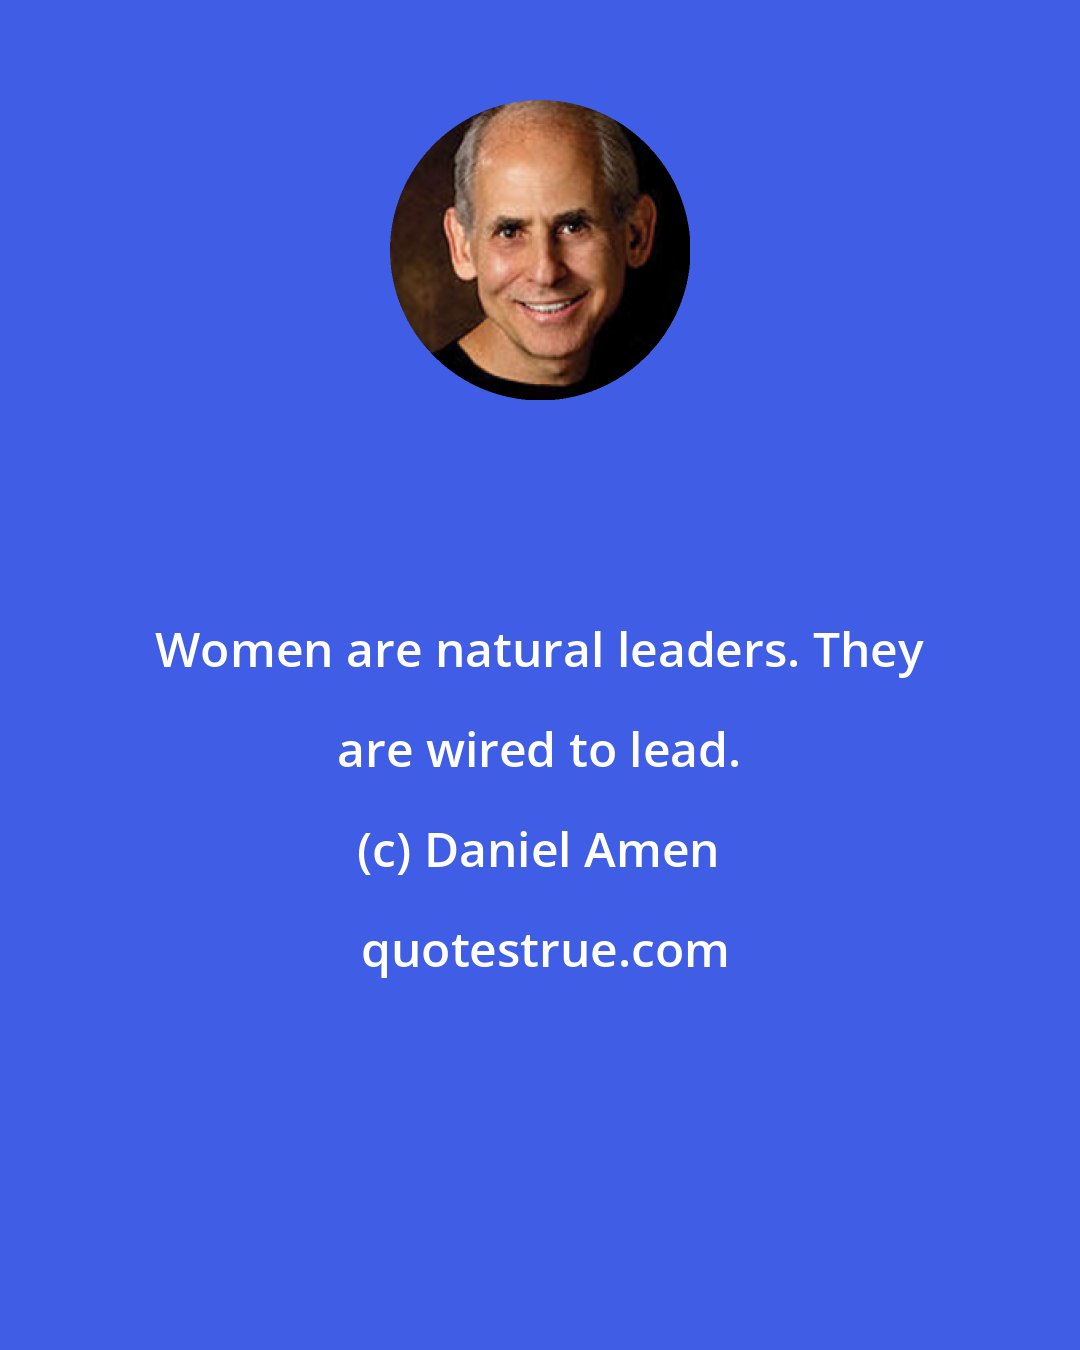 Daniel Amen: Women are natural leaders. They are wired to lead.